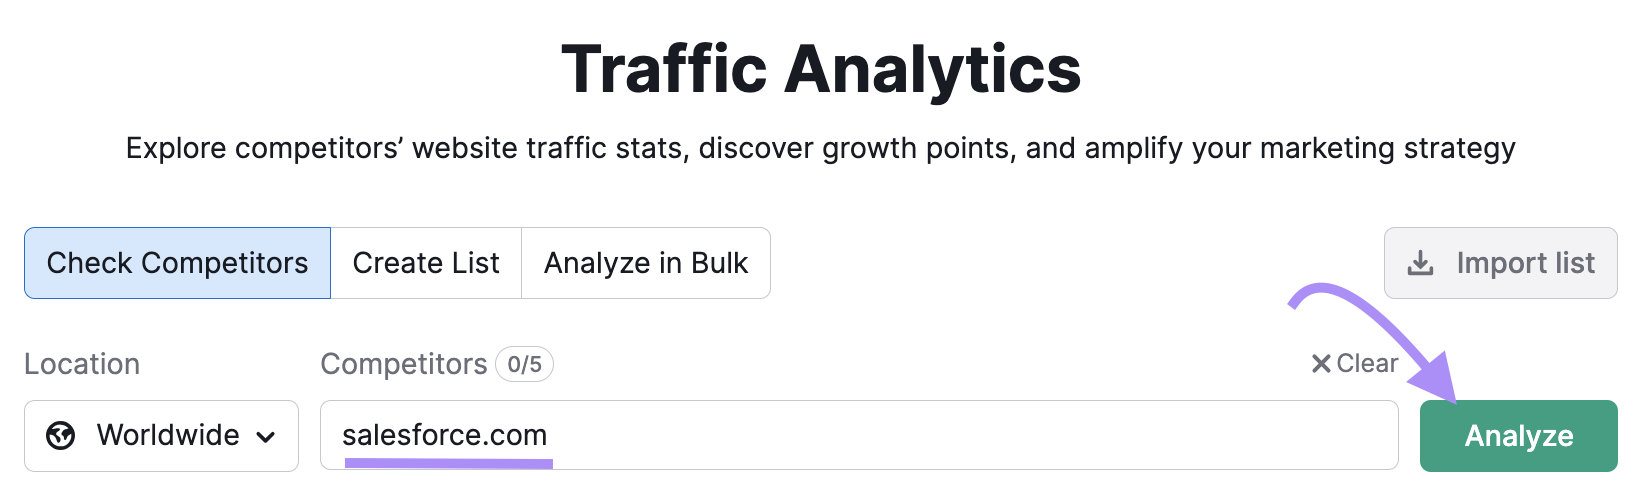 "salesforce.com" entered into the Traffic Analytics search bar